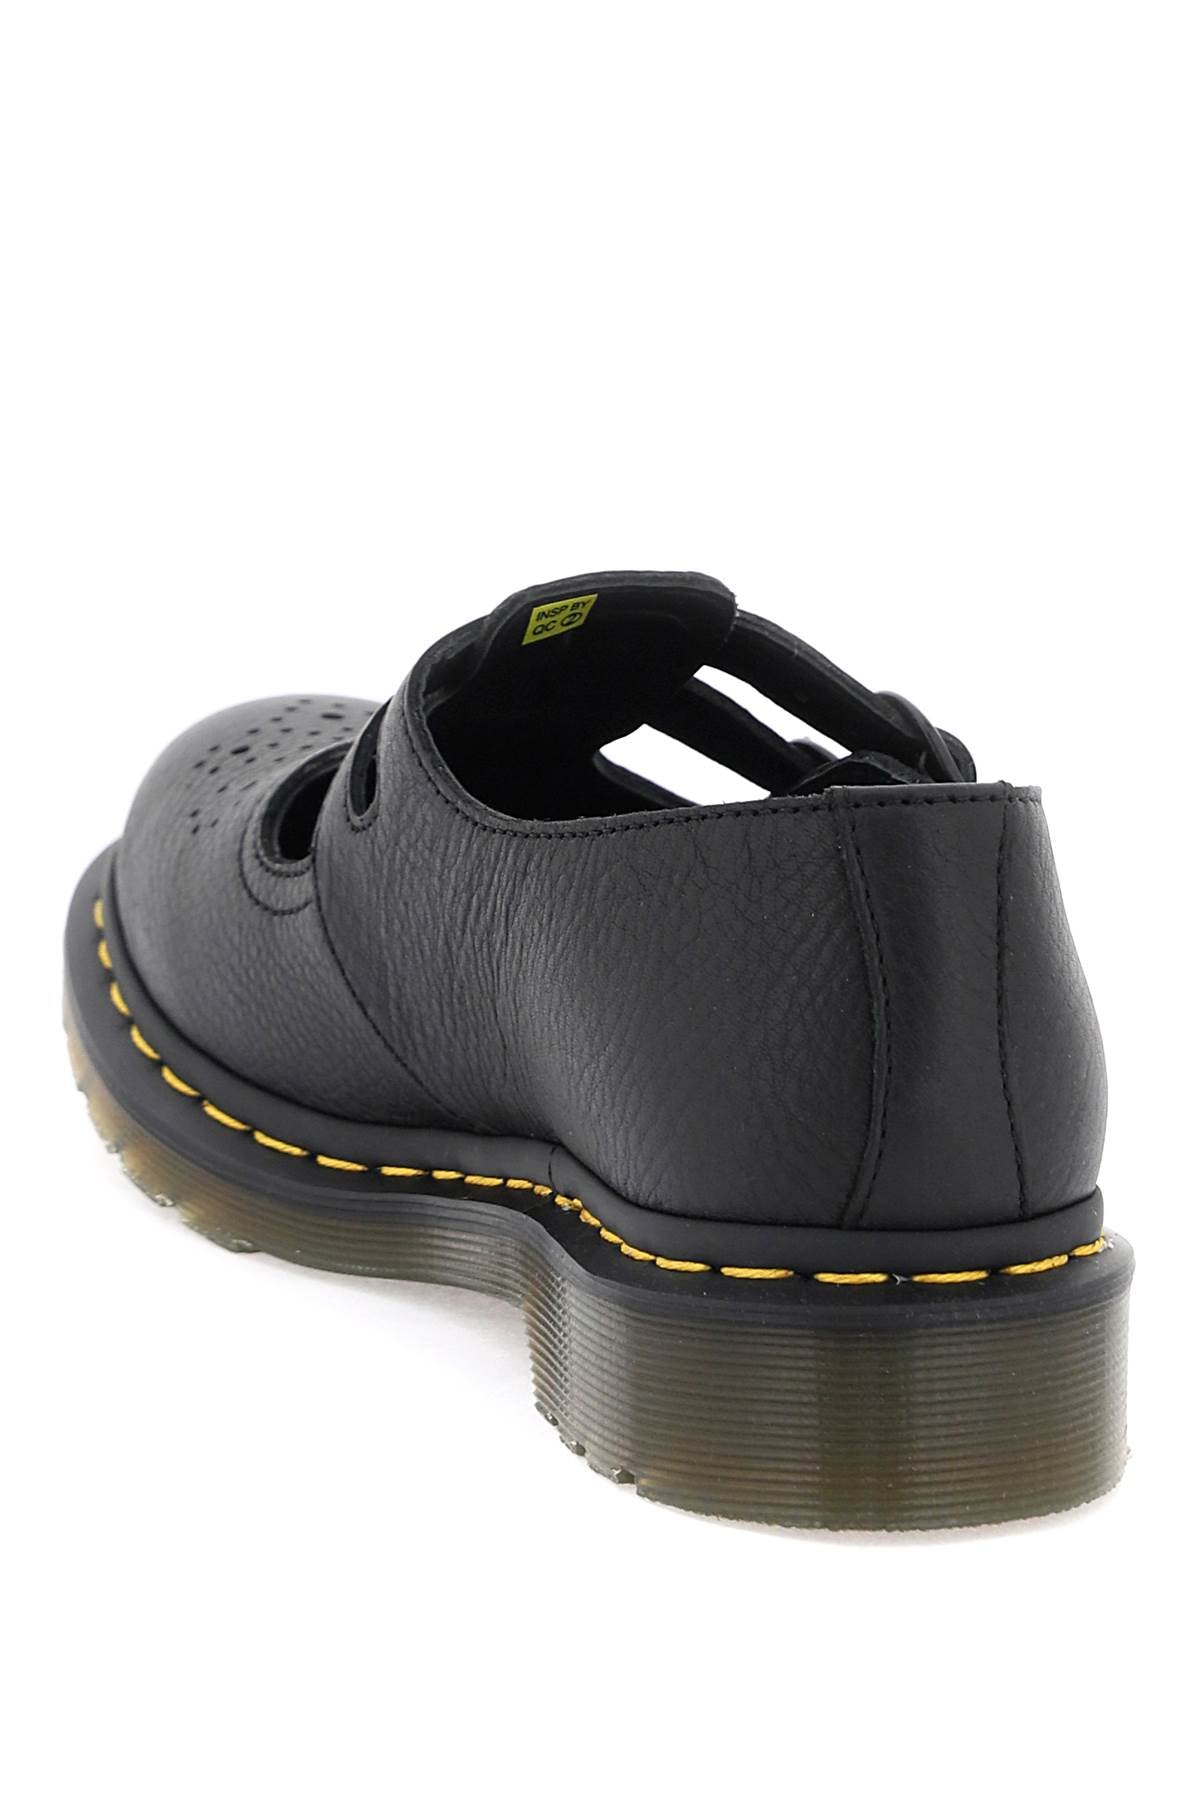 Dr.martens "leather virginia mary jane shoes-2